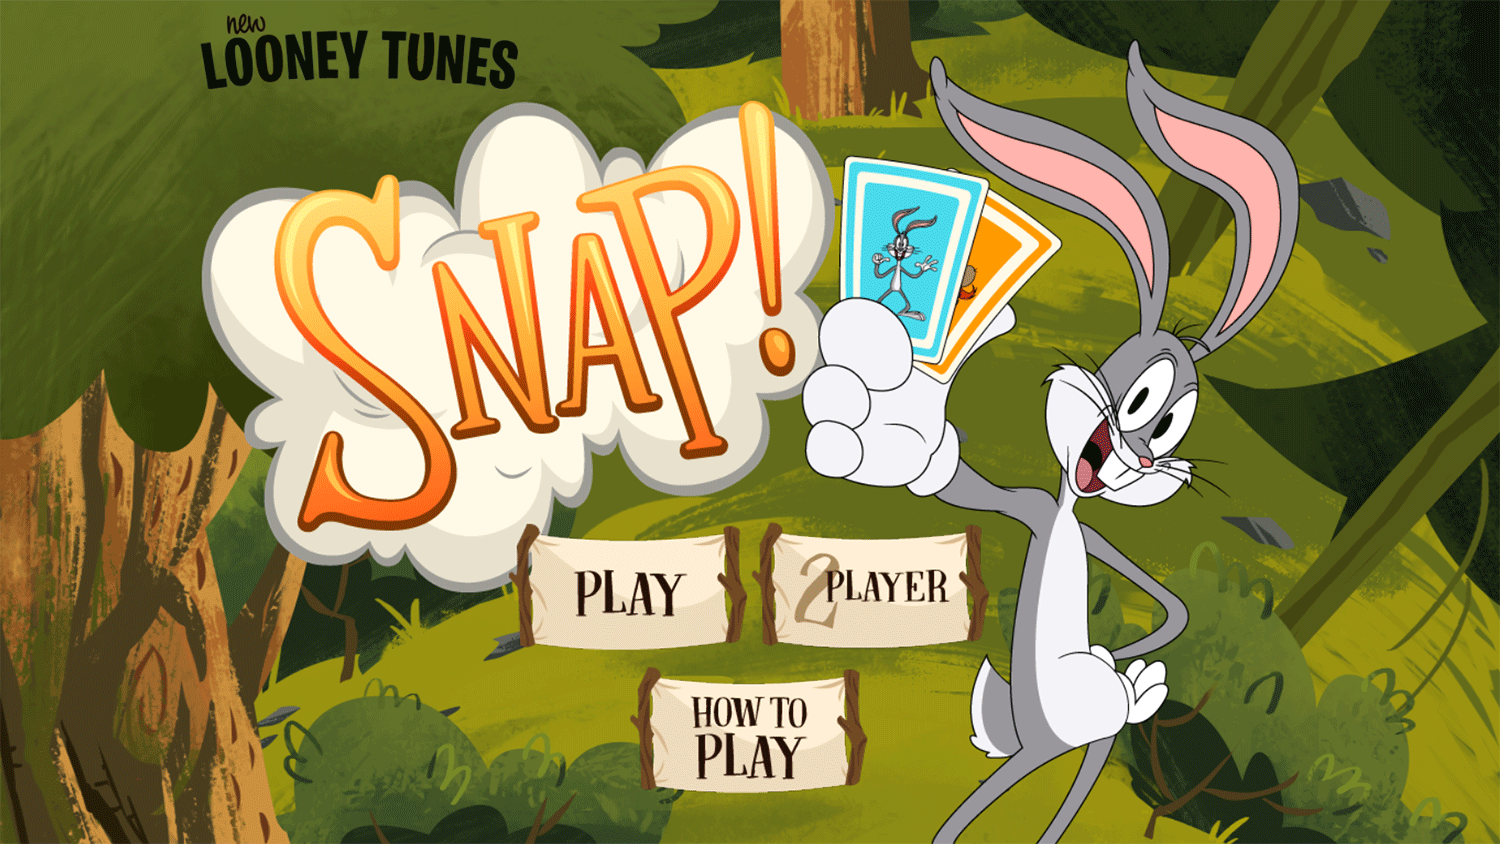 New Looney Tunes Snap Game Welcome Screen Screenshot.